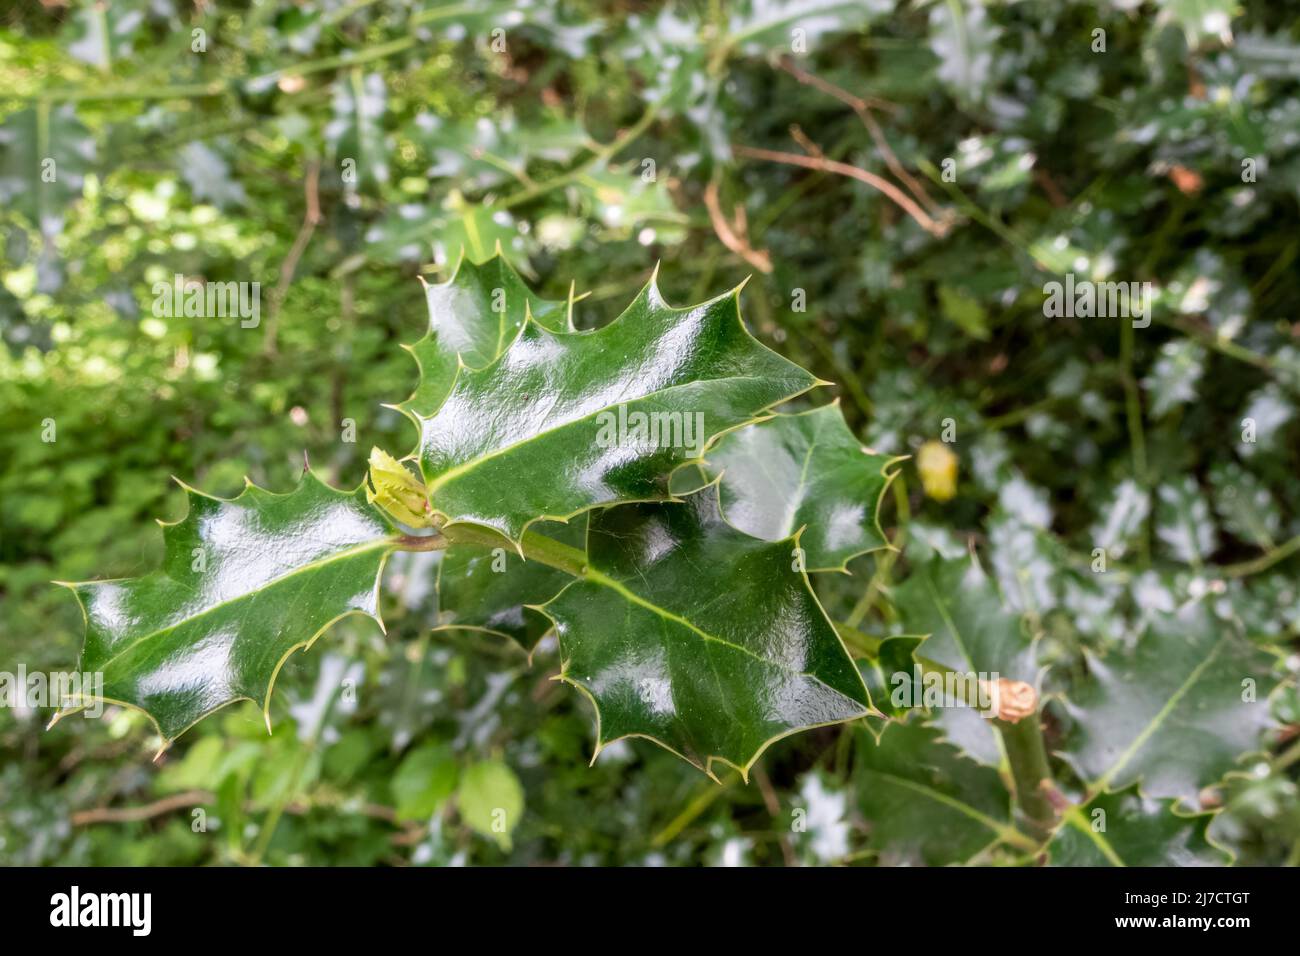 close up of dark green waxy pointed holly leaves (Ilex) Stock Photo